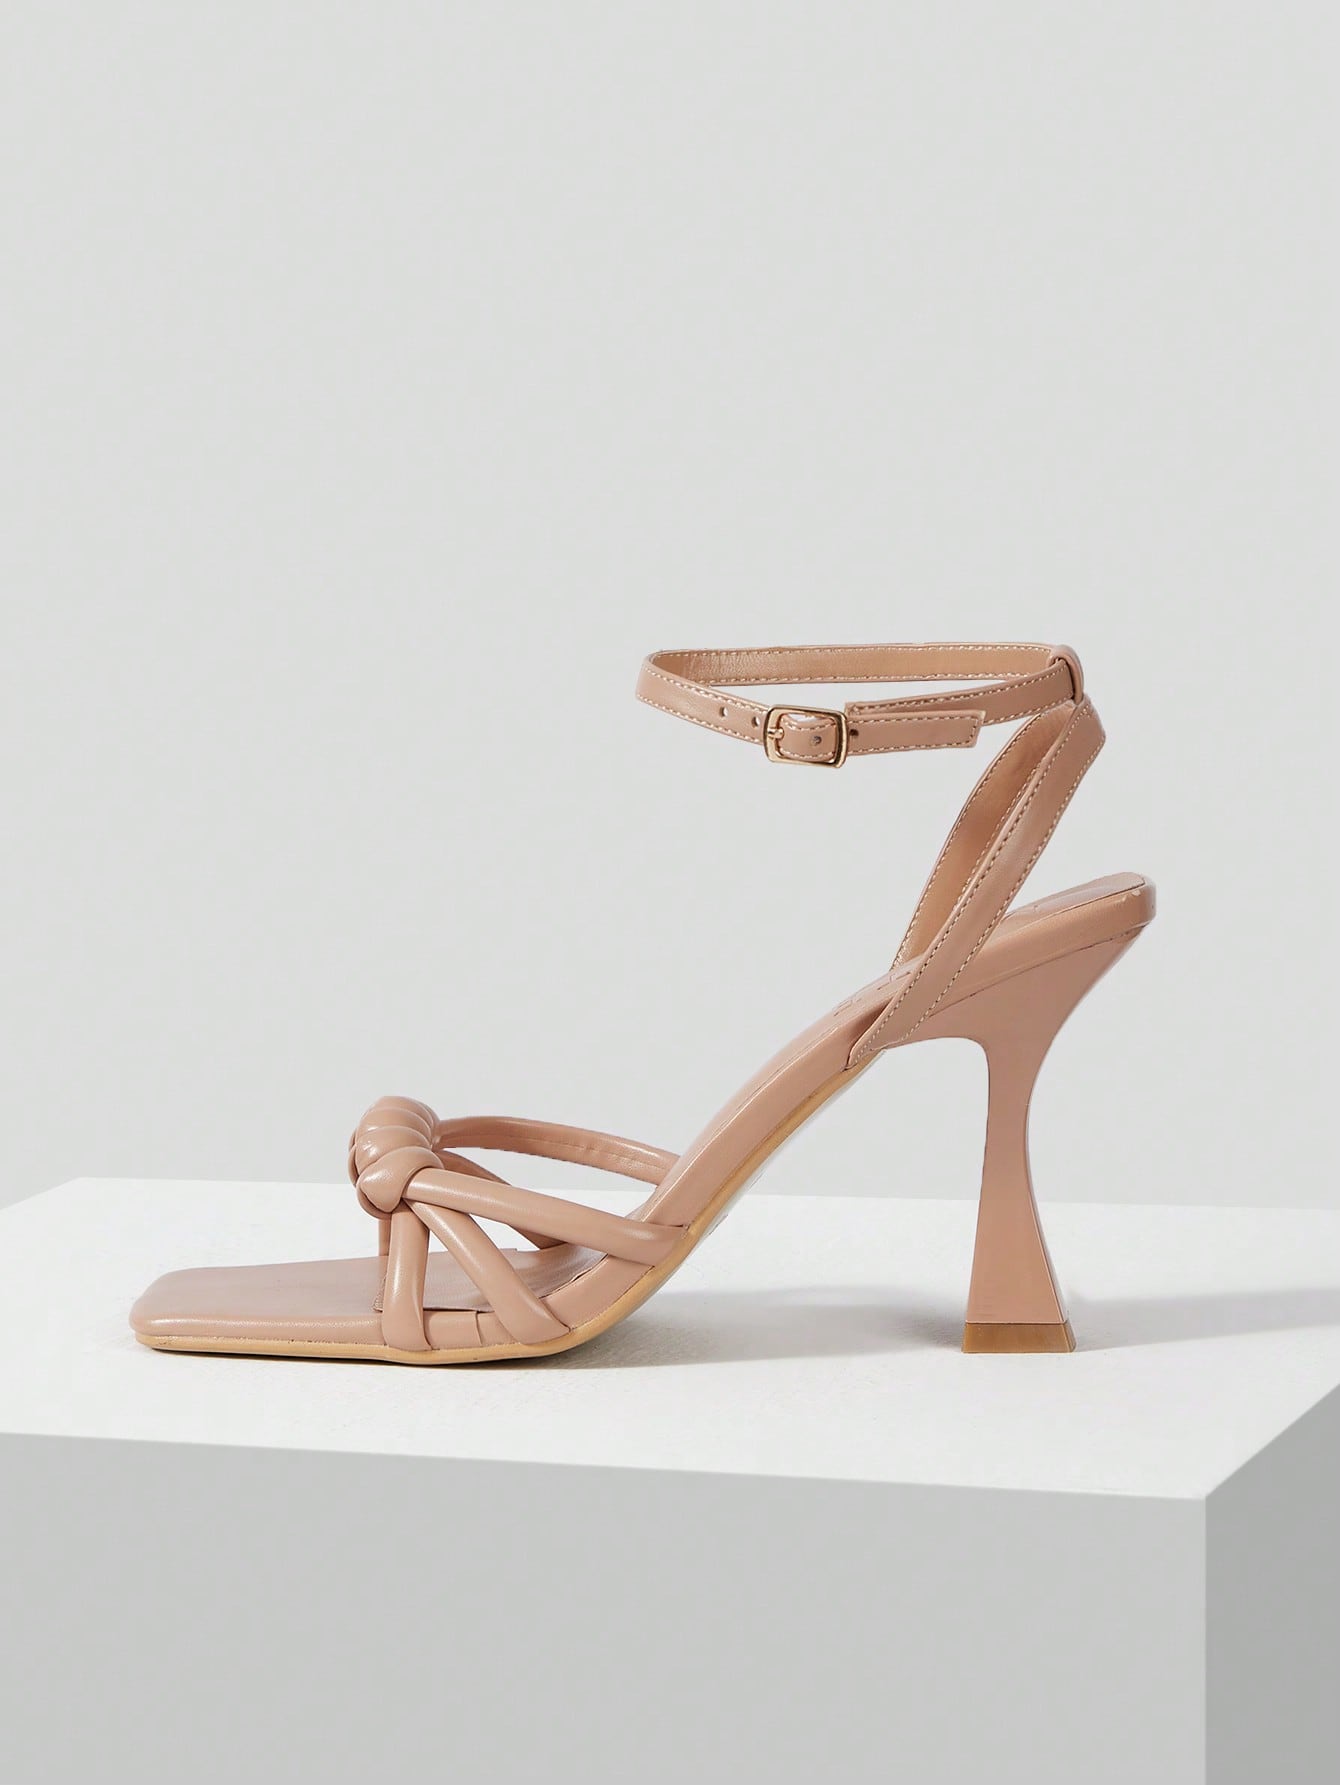 STRAPPY KNOT HEELED SANDALS